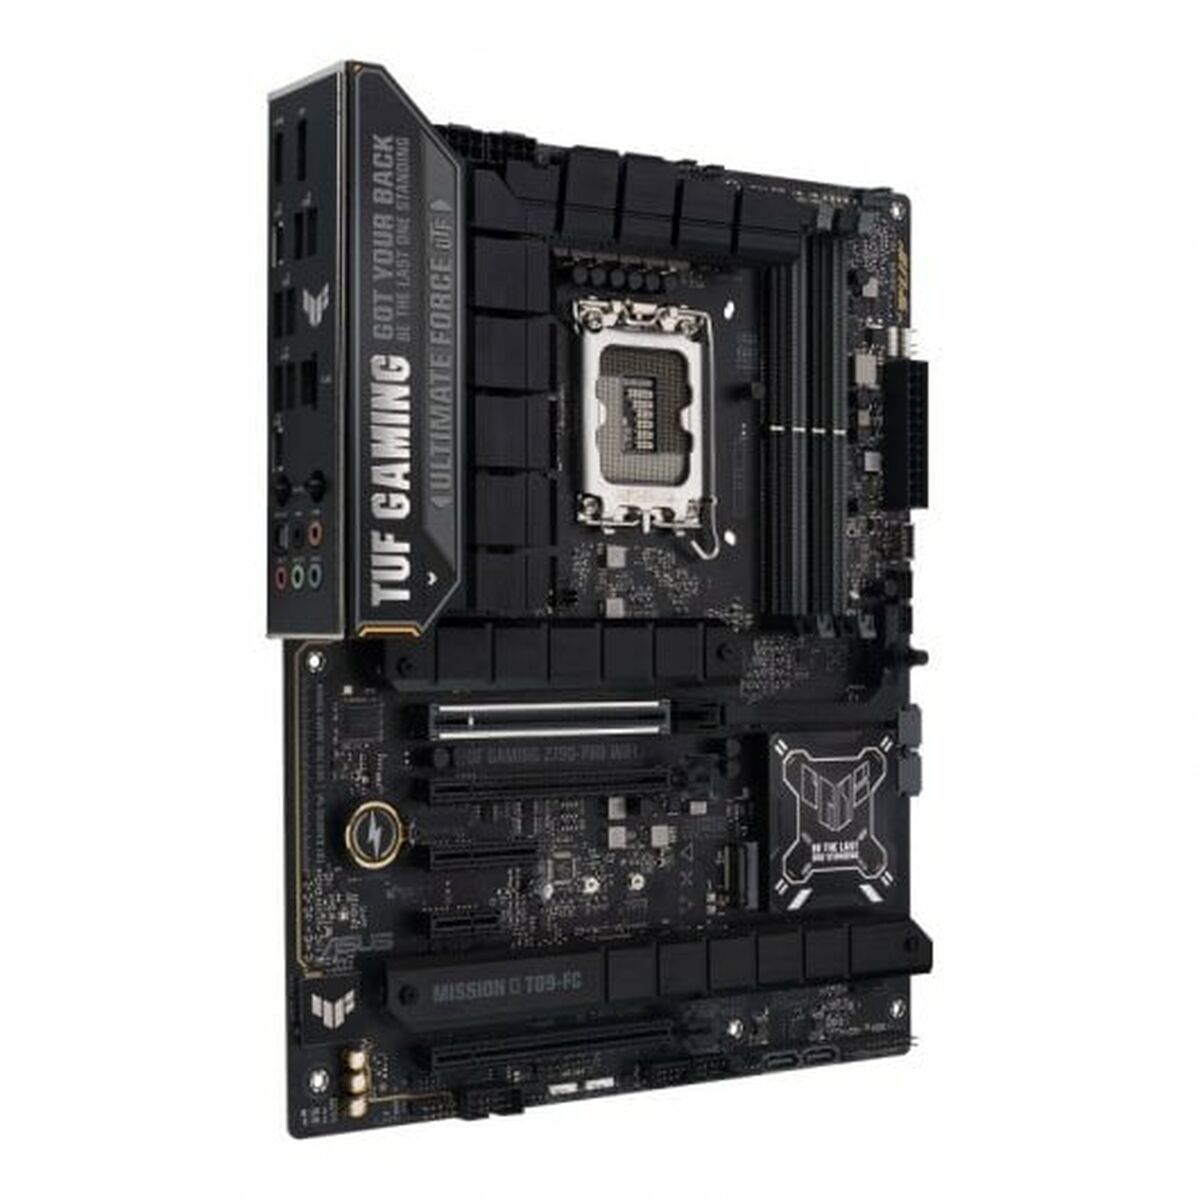 Motherboard Asus TUF GAMING Z790-PRO LGA 1700 Intel Z790 Express, Asus, Computing, Components, motherboard-asus-tuf-gaming-z790-pro-lga-1700-intel-z790-express, Brand_Asus, category-reference-2609, category-reference-2803, category-reference-2804, category-reference-t-19685, category-reference-t-19912, category-reference-t-21360, category-reference-t-25660, computers / components, Condition_NEW, Price_200 - 300, Teleworking, RiotNook